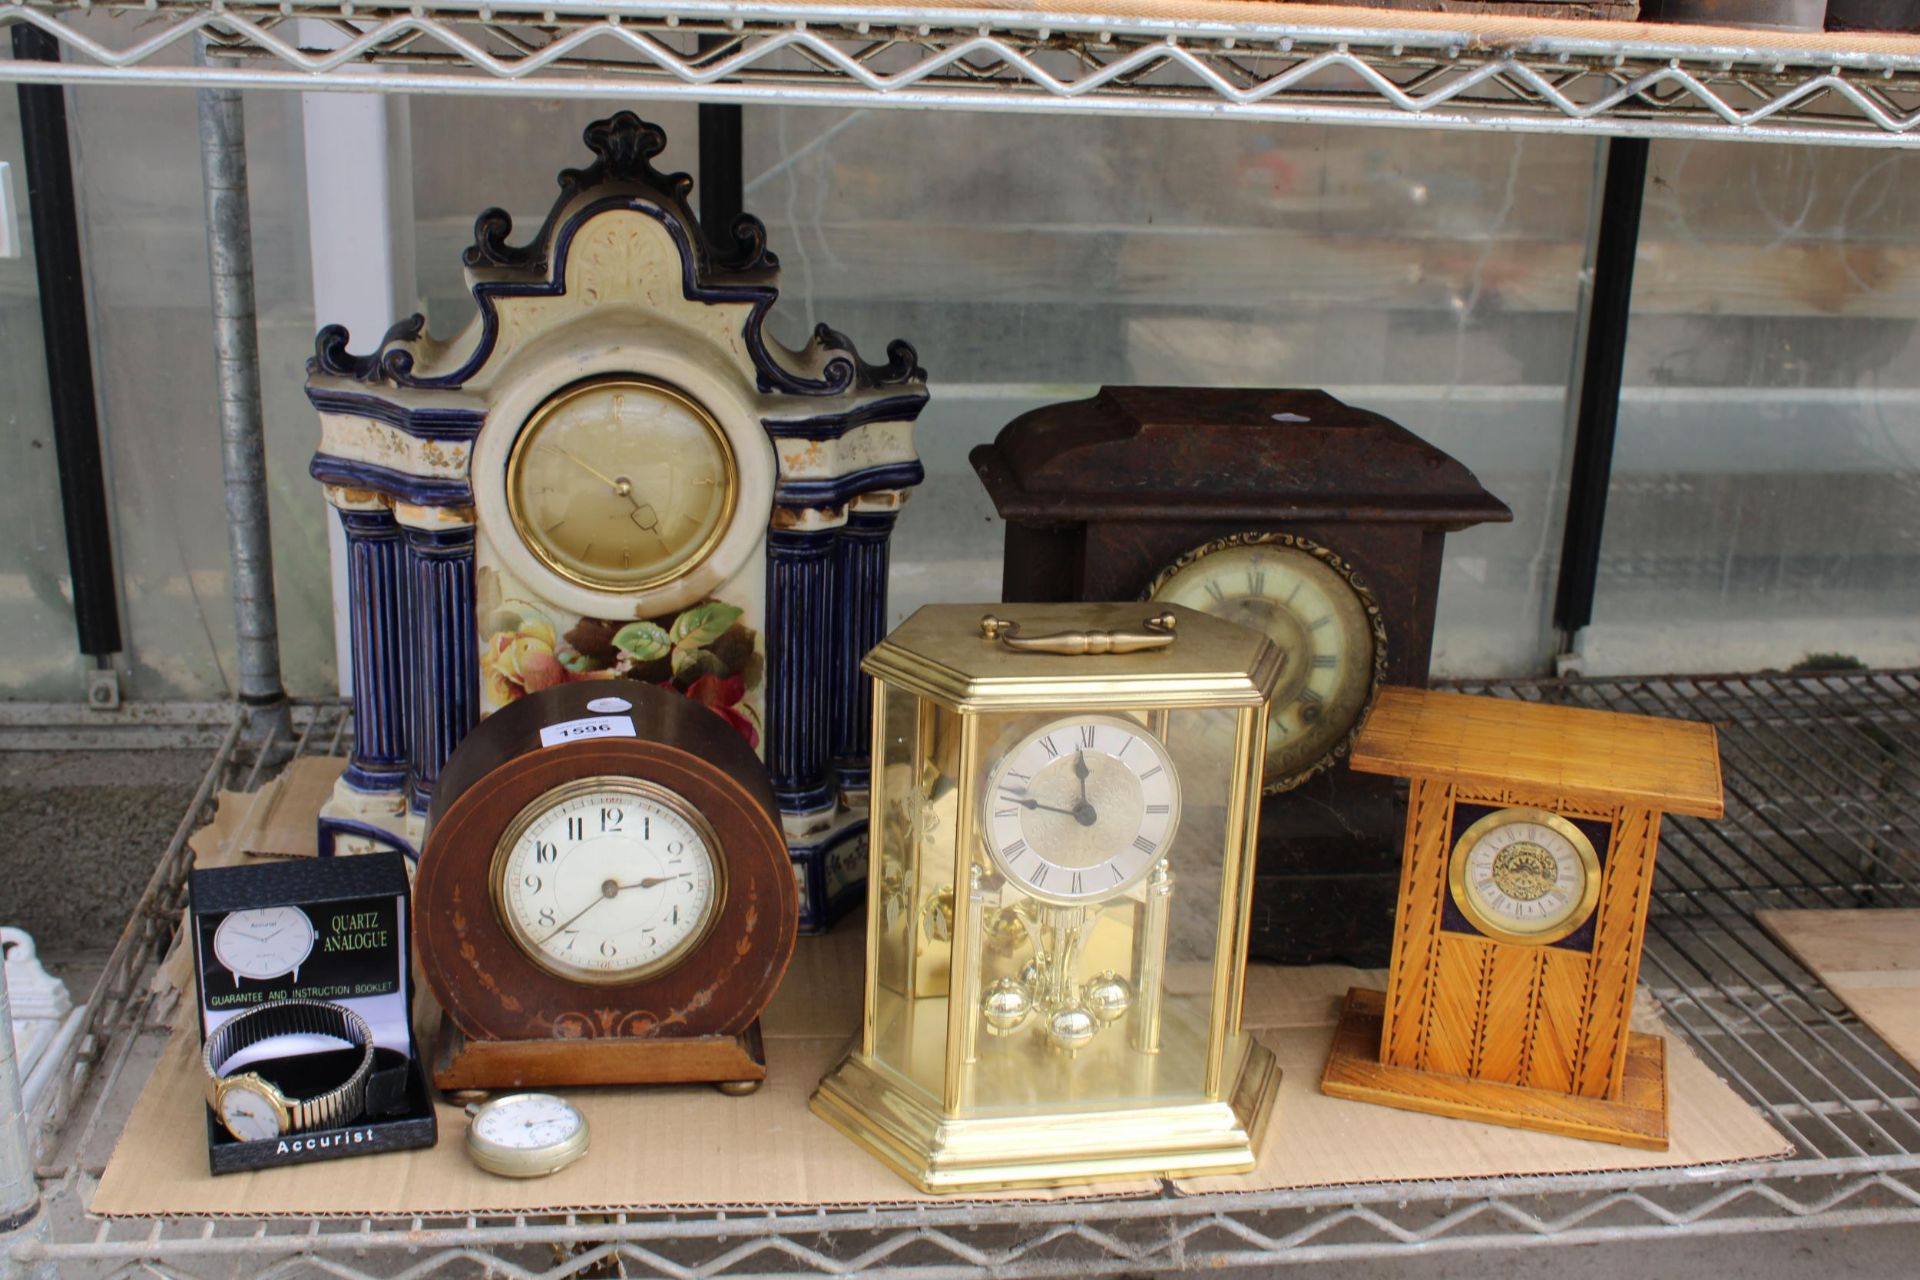 AN ASSORTMENT OF VINTAGE CLOCKS TO INCLUDE A CERAMIC MANTLE CLOCK, AN ANIVERSARY CLOCK AND A